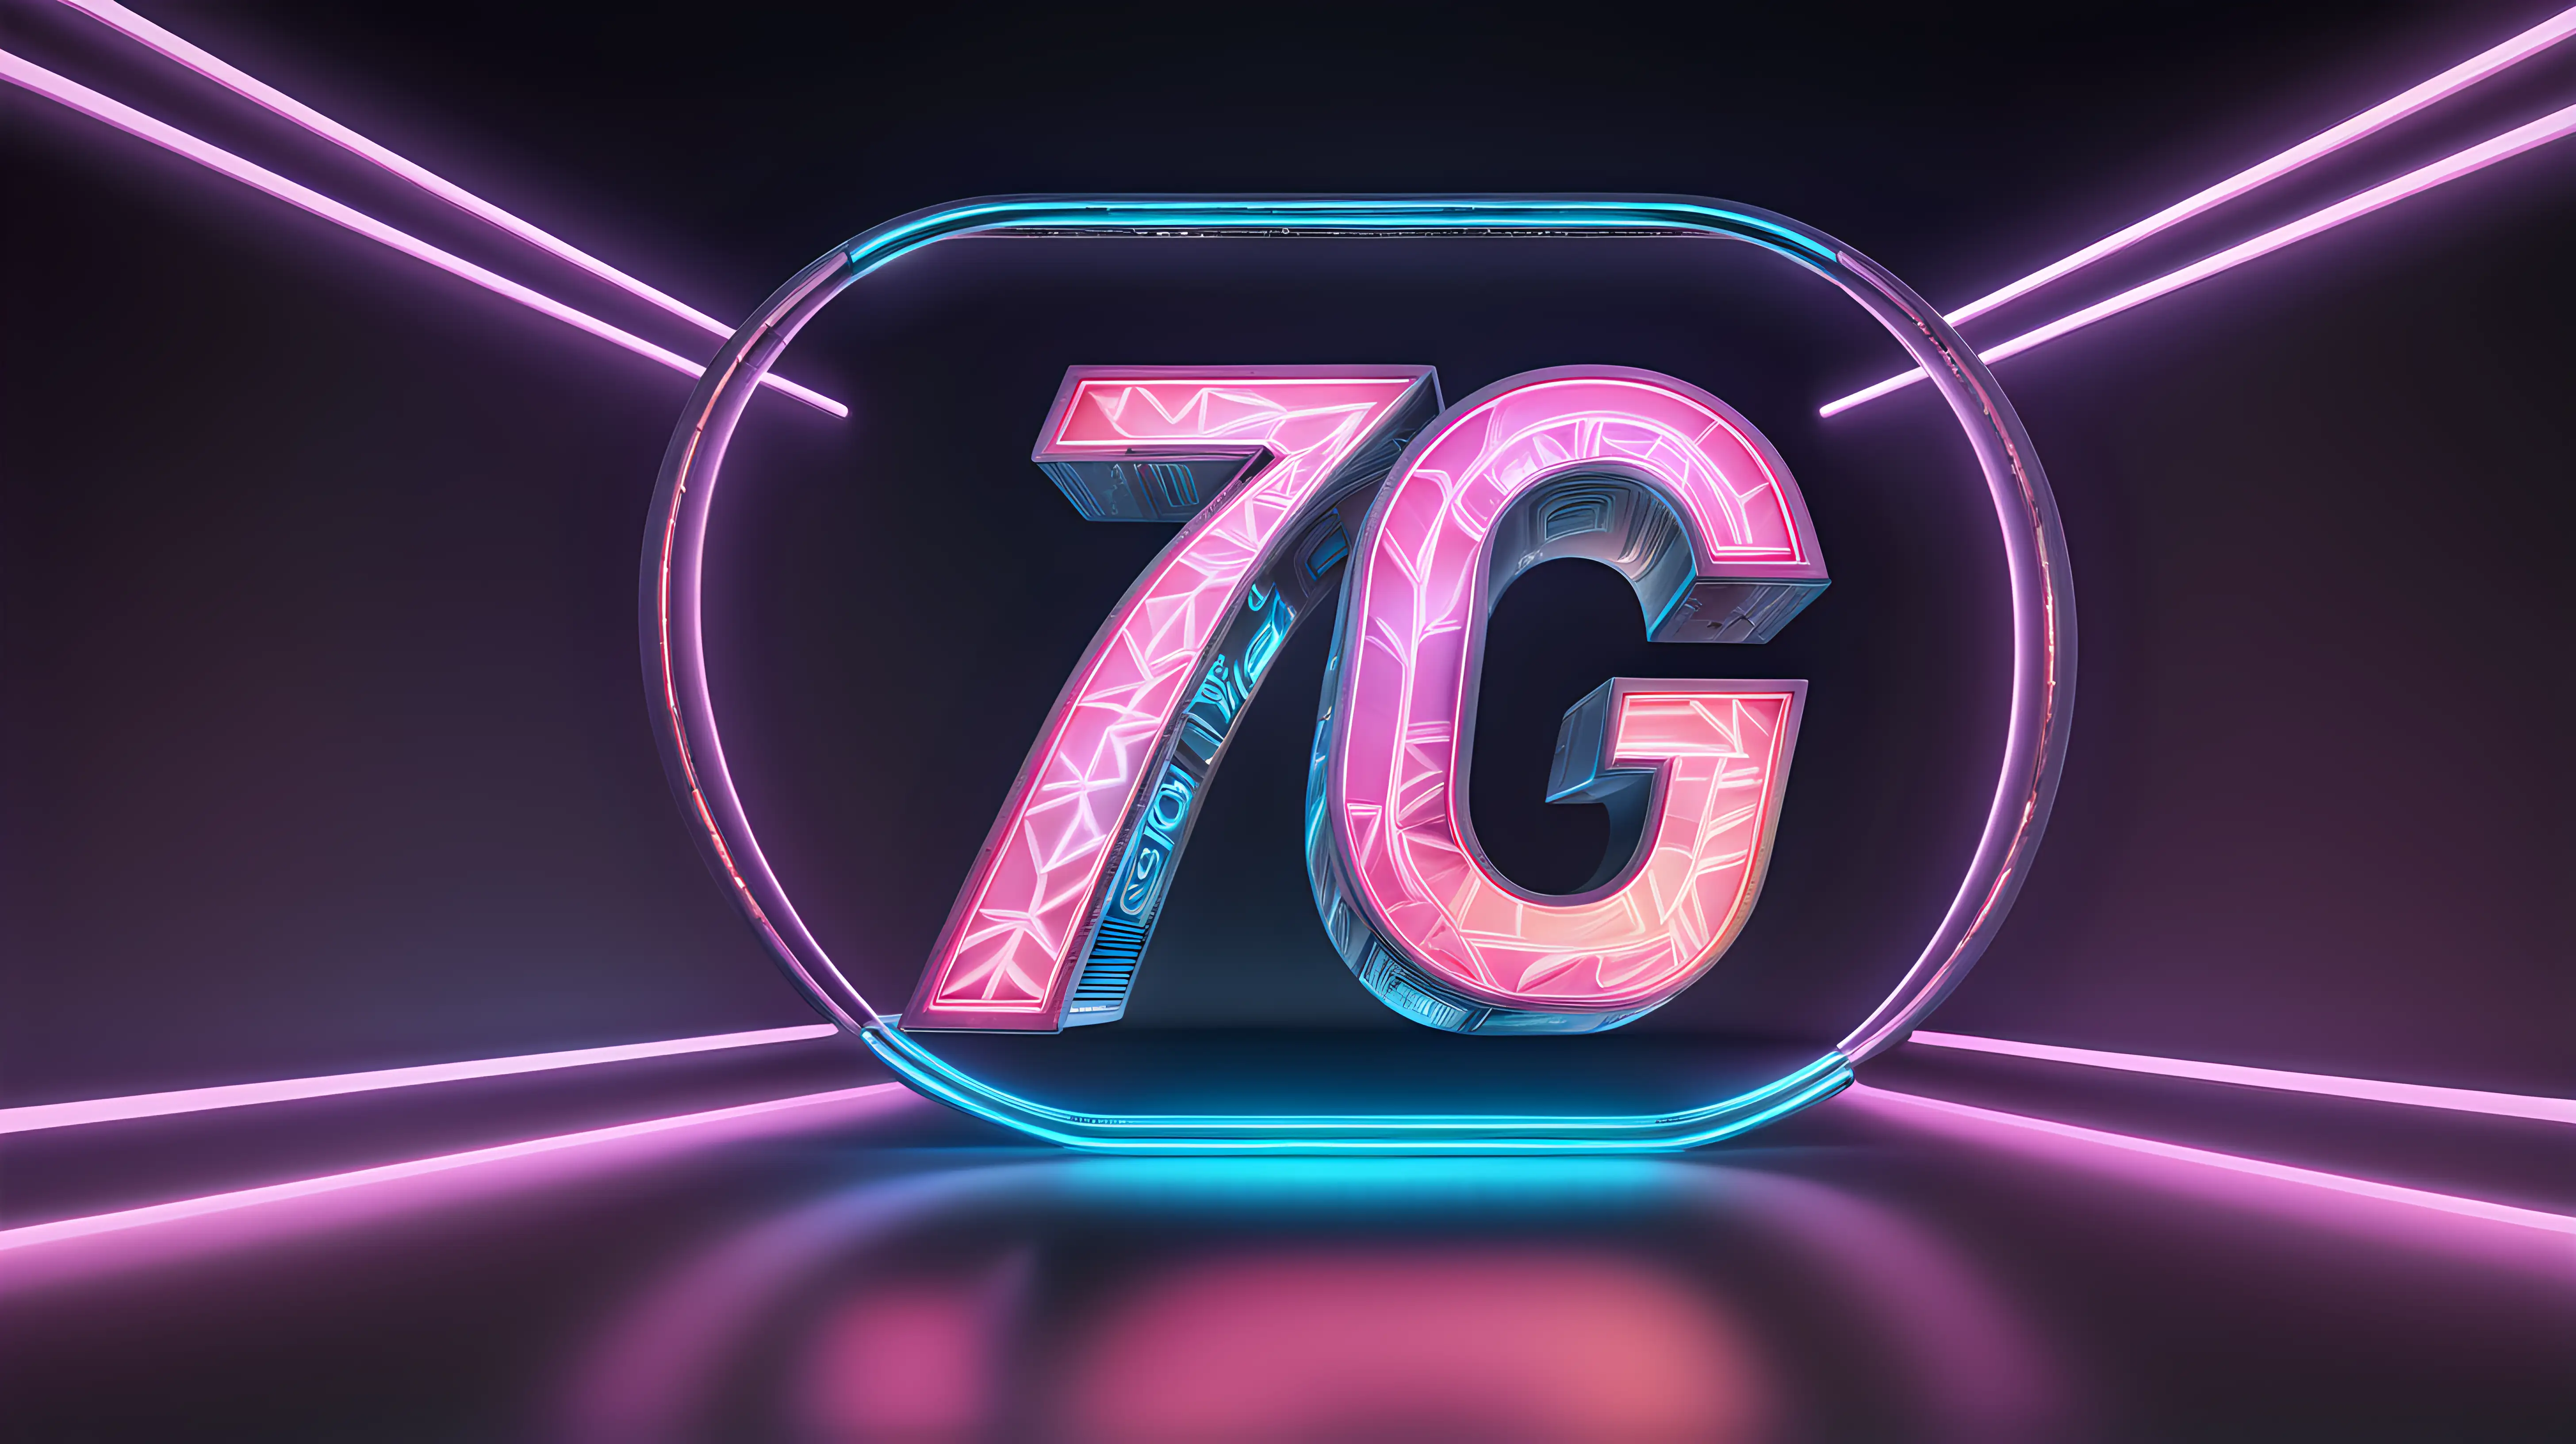 Create an image where the number "7G" is illuminated in the center with futuristic, neon-like lighting against a dark, sleek background, evoking a sense of advanced technology.